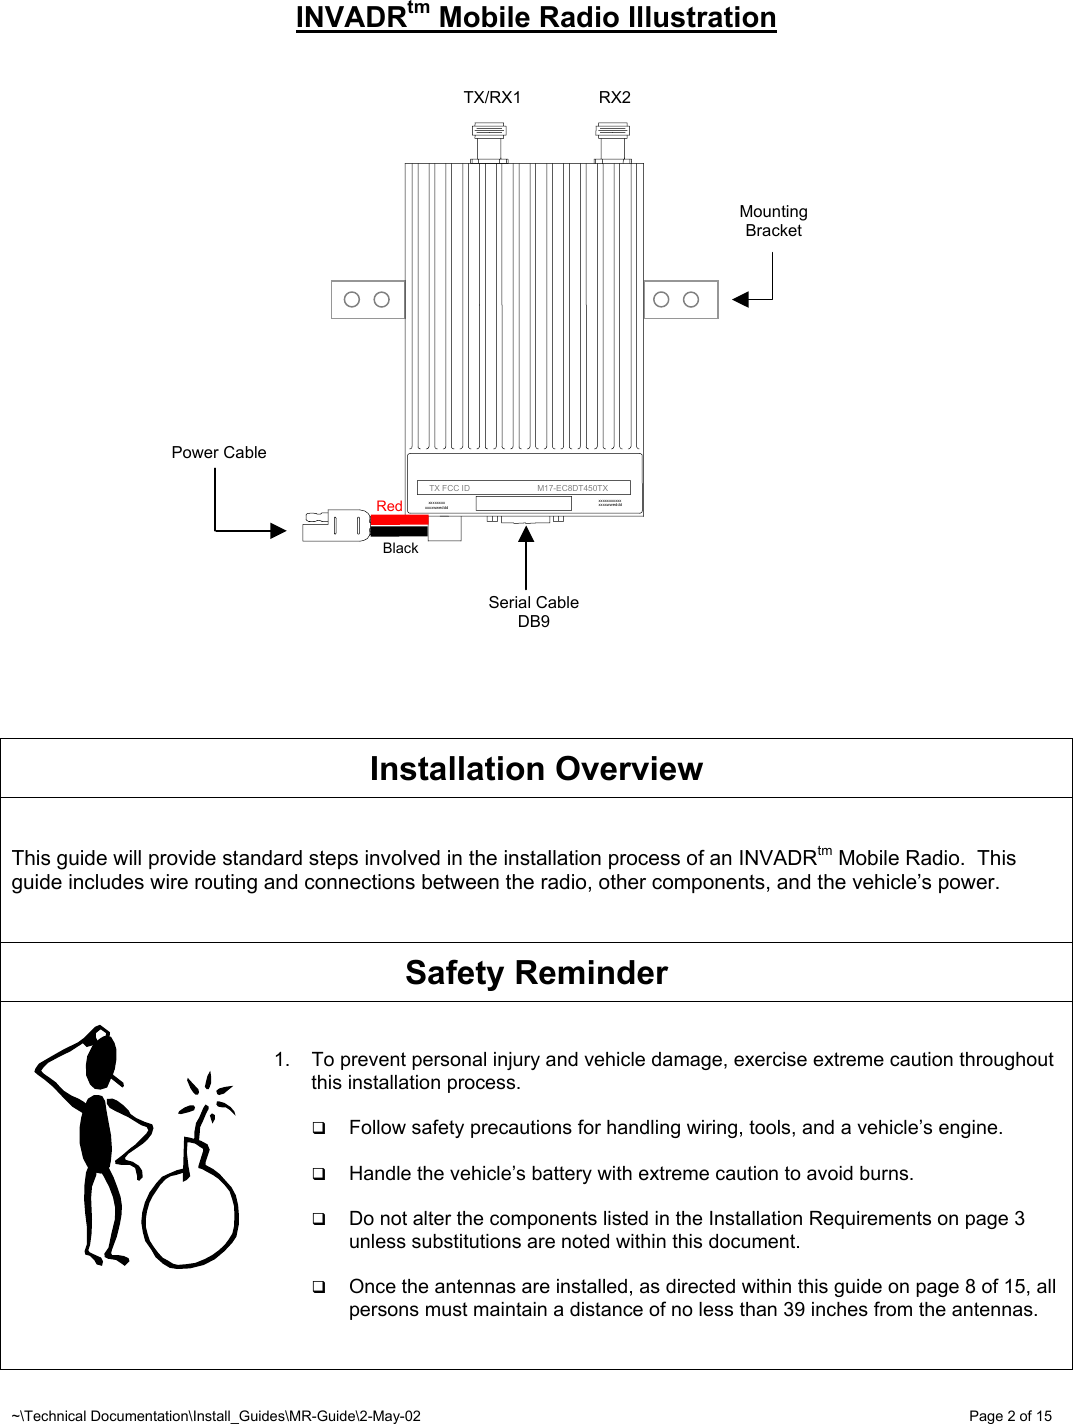 ~\Technical Documentation\Install_Guides\MR-Guide\2-May-02   Page 2 of 15 INVADRtm Mobile Radio Illustration                      Installation Overview   This guide will provide standard steps involved in the installation process of an INVADRtm Mobile Radio.  This guide includes wire routing and connections between the radio, other components, and the vehicle’s power.    Safety Reminder   1.  To prevent personal injury and vehicle damage, exercise extreme caution throughout this installation process.    Follow safety precautions for handling wiring, tools, and a vehicle’s engine.    Handle the vehicle’s battery with extreme caution to avoid burns.    Do not alter the components listed in the Installation Requirements on page 3 unless substitutions are noted within this document.    Once the antennas are installed, as directed within this guide on page 8 of 15, all persons must maintain a distance of no less than 39 inches from the antennas.    BlackRedTX/RX1  RX2 Serial Cable DB9 Power Cable Mounting Bracket      TX FCC ID                             M17-EC8DT450TX xxxxxxxxxxx xxxxwweddd xxxxxxxx xxxxwweddd 